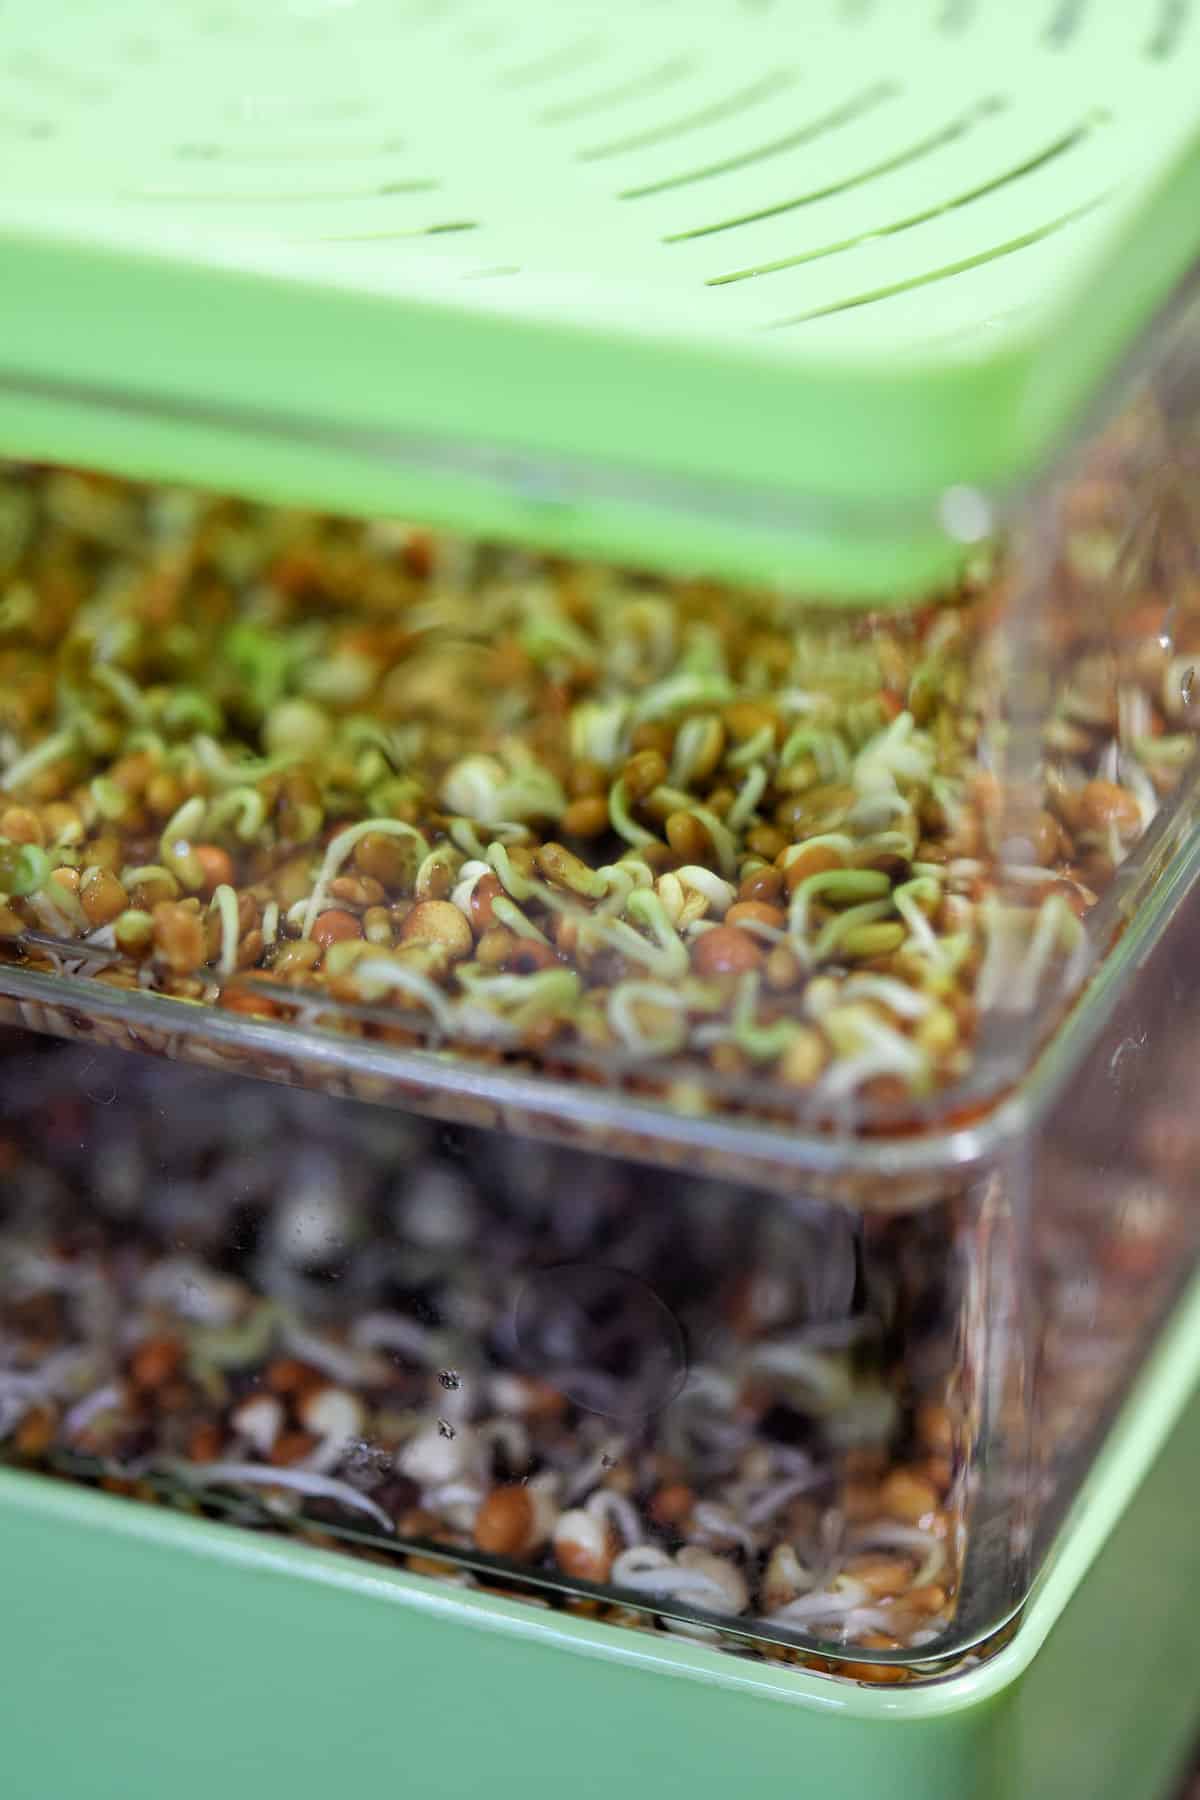 alfalfa seeds in a sprouting tray, starting to germinate